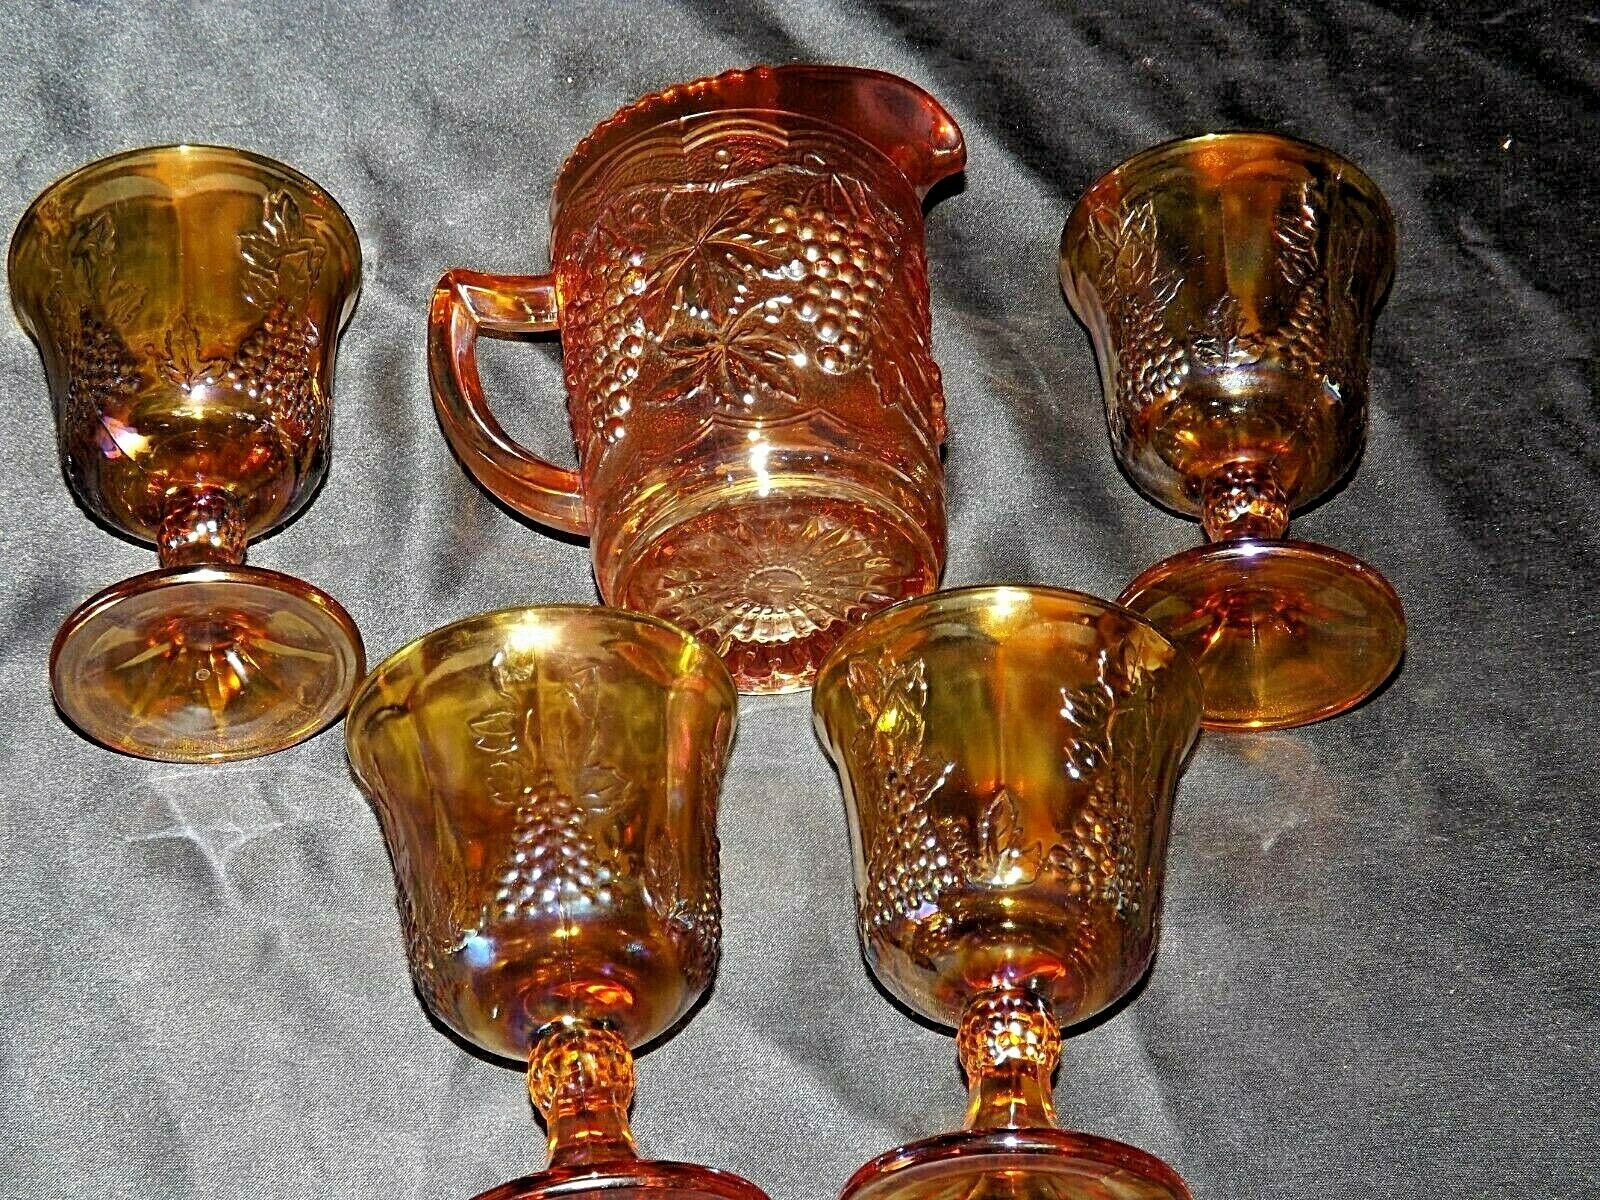 Vintage Amber Glass Pitcher & Goblets Set of 4 Glasses With Matching Pitcher  Retro Drink Serving Lemonade Pitcher Cute Gift by Lpuniquities 